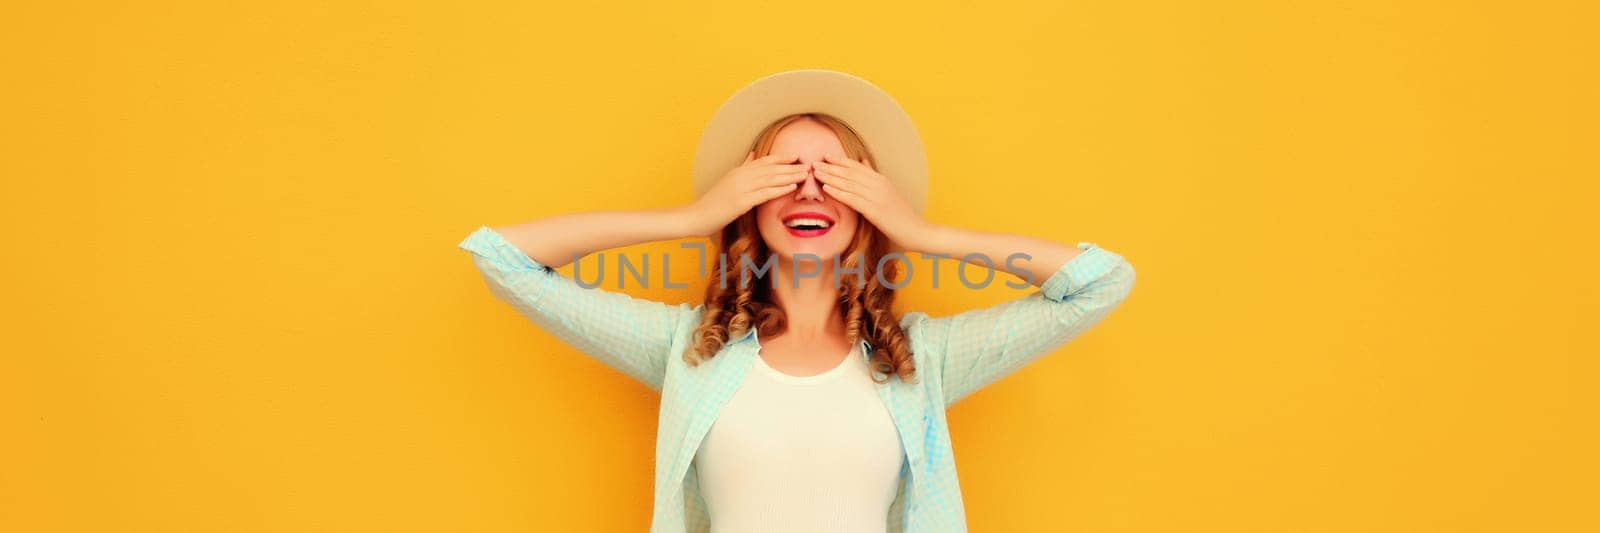 Stylish surprised young woman covering her eyes with hands wearing summer straw hat, jean jacket posing on yellow background